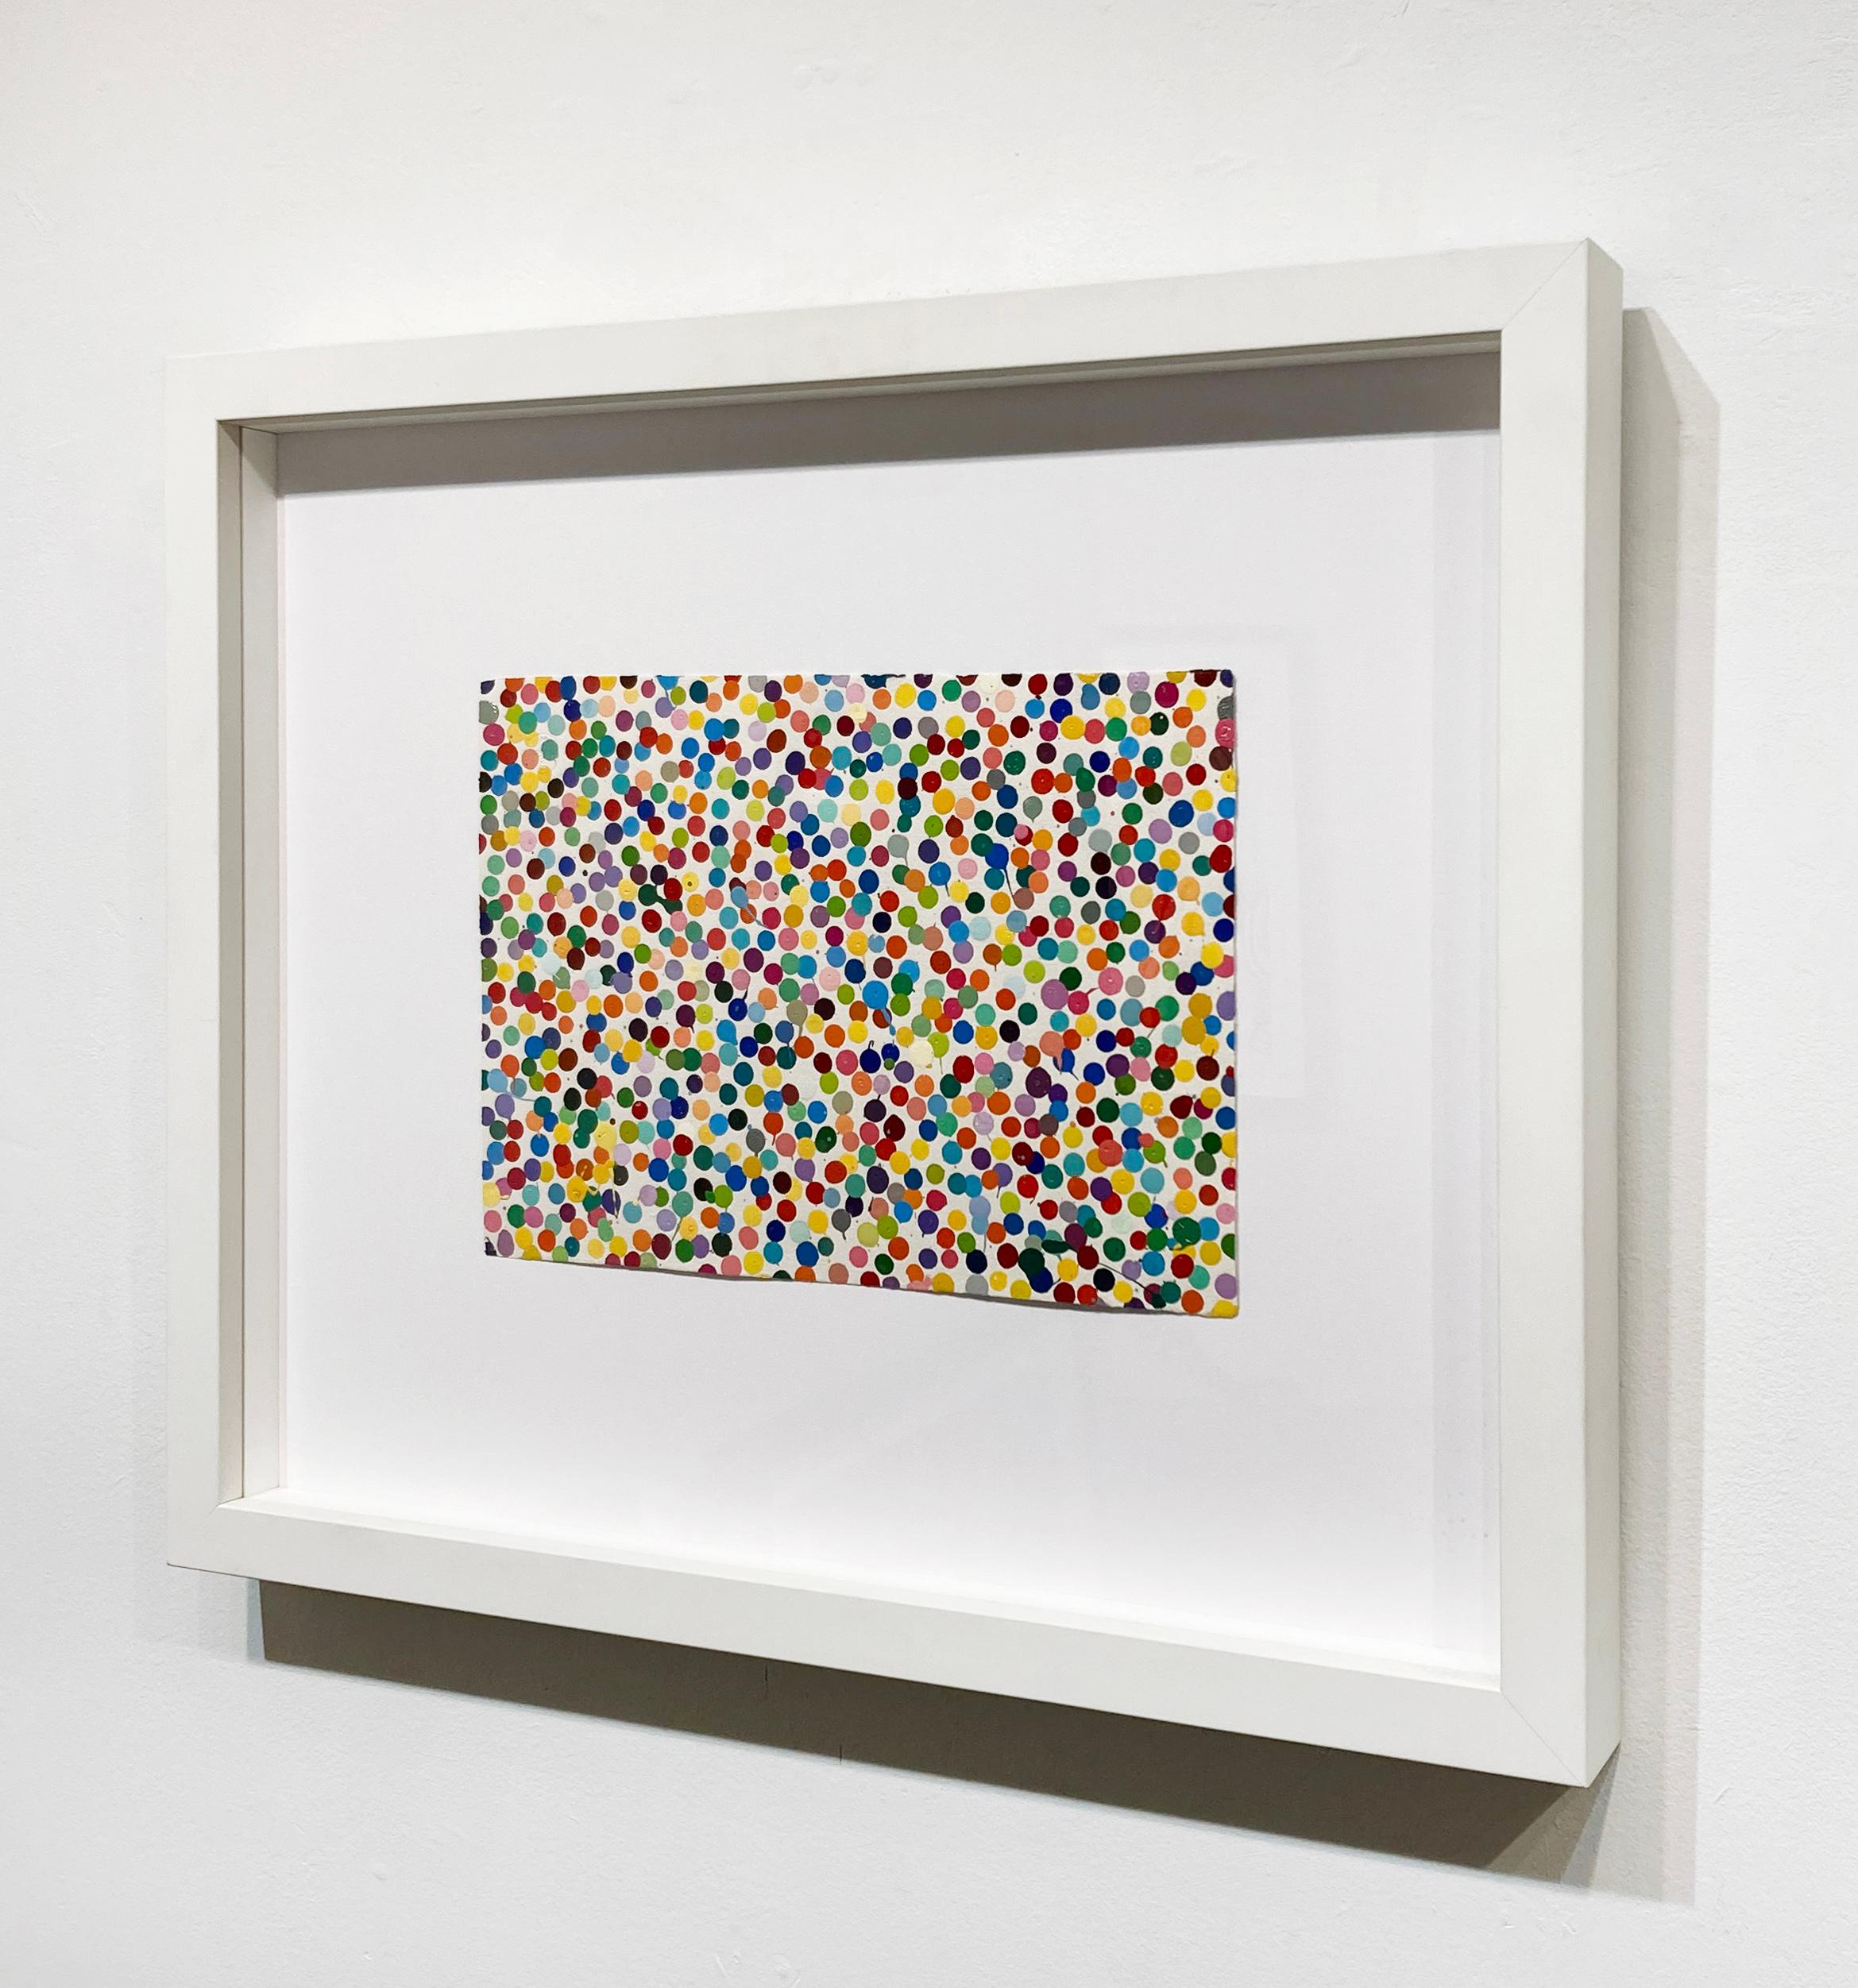 Artist:  Hirst, Damien
Title:  More To Come
Series:  The Currency
Date:  2016
Medium:  One shot enamel paint on handmade paper
Unframed Dimensions:  8.4